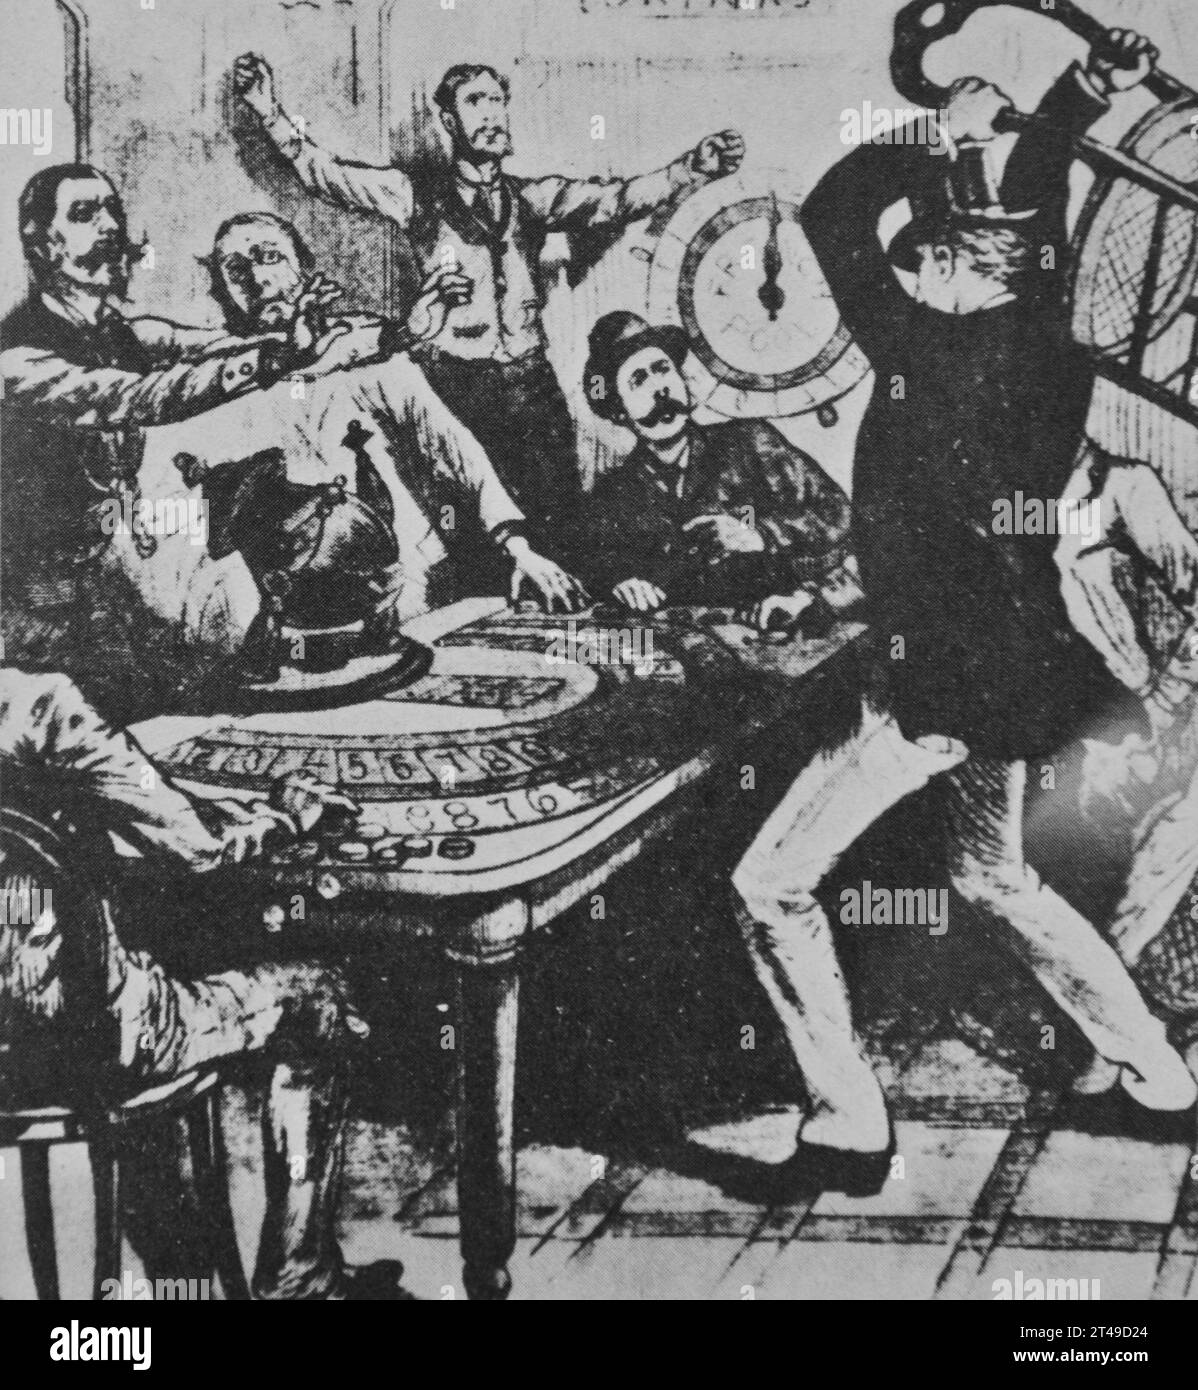 19th century drawing. Scene showing an angry player after losing a game. He takes his anger out on the game table as the bystanders react in shock. Stock Photo